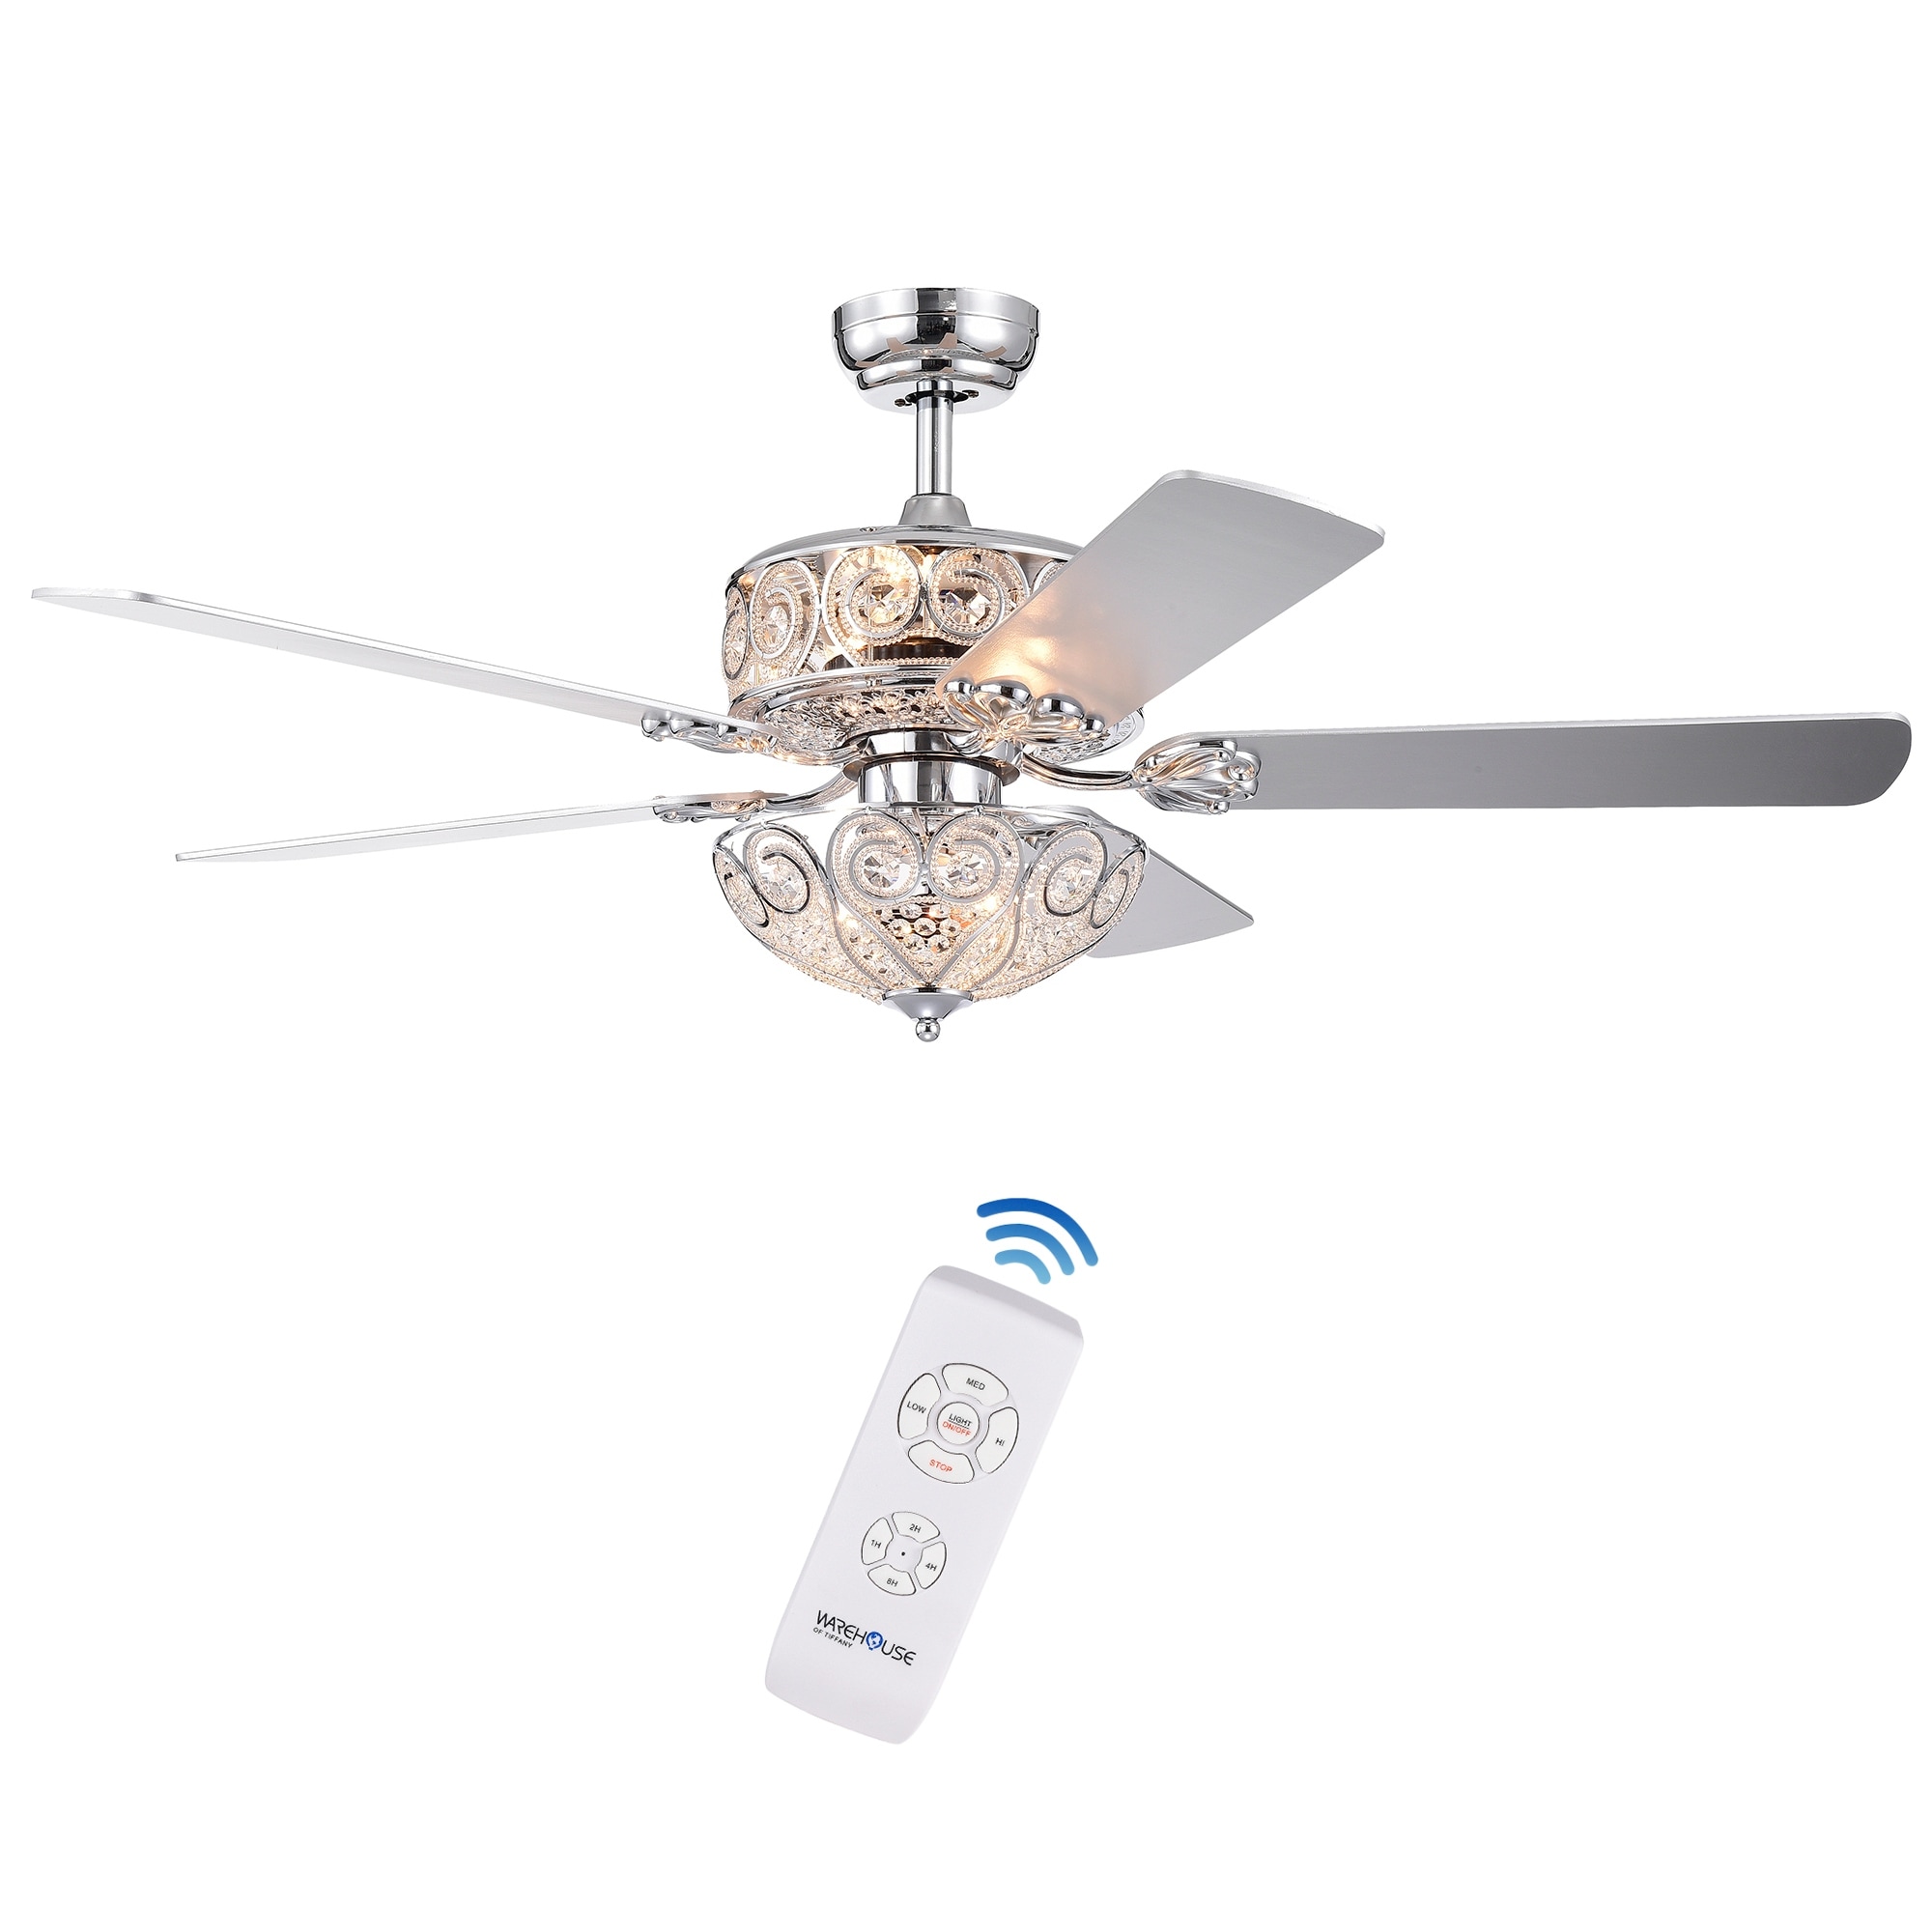 Catalina Chrome 5-blade 52-inch Crystal Ceiling Fan